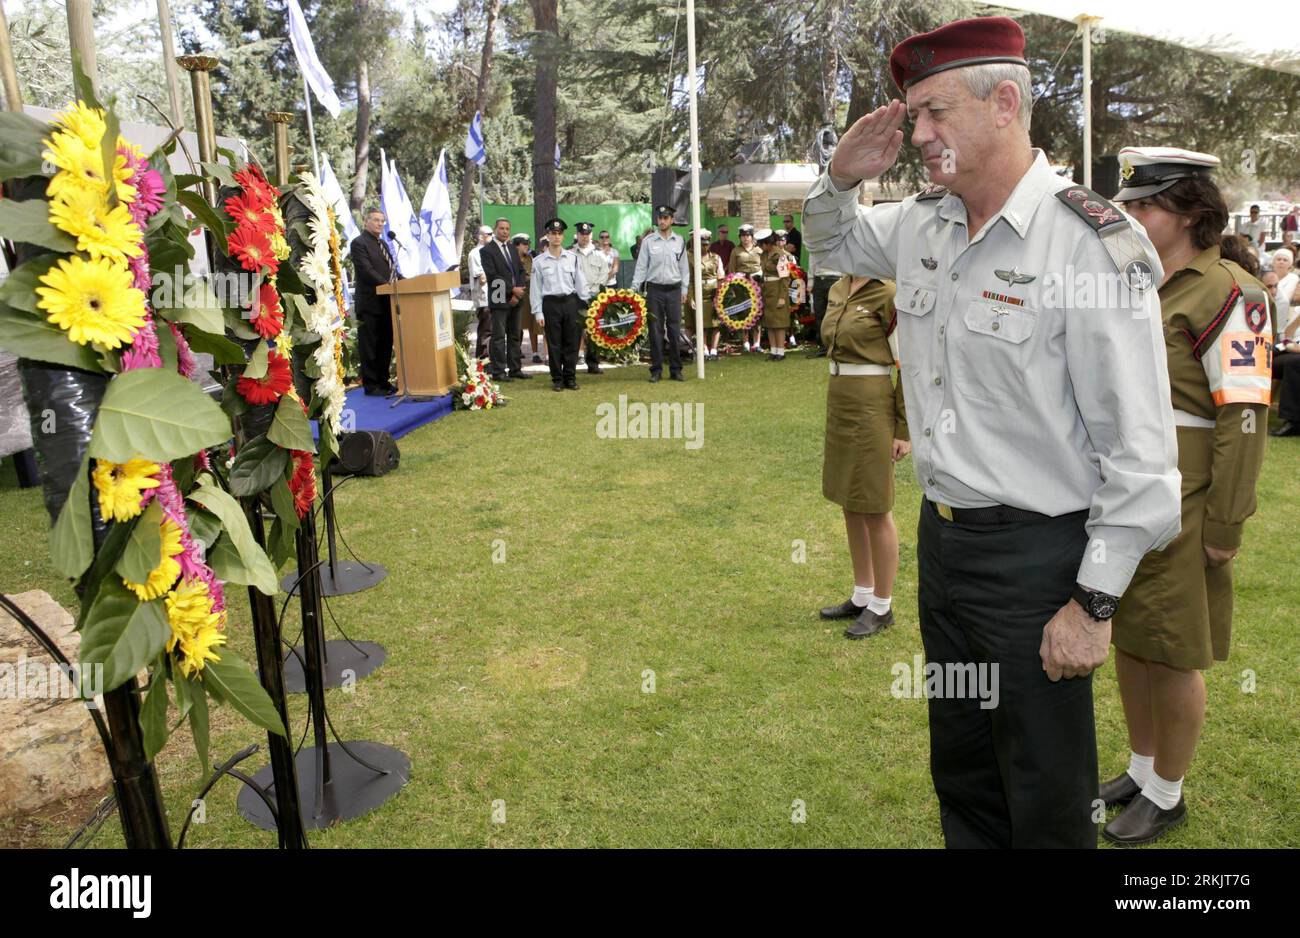 Bildnummer: 56161866  Datum: 09.10.2011  Copyright: imago/Xinhua (111009) -- JERUSALEM, Oct. 9, 2011 (Xinhua) -- Israeli defense forces Chief of Staff Benny Ganz gives salute to victims of the Yom Kippur War in 1973 at the Mount Herzl military cemetery in Jerusalem, Israel, Oct. 9, 2011. Egyptian and Syrian armies launched a surprise attack against Israeli soldiers on Yom Kippur, the holiest day in Judaism, on Oct. 6, 1973, killing over 2,600 Israeli soldiers. (Xinhua/Ariel Jerozolimski) (lmm) MIDEAST-ISRAEL-YOM KIPPUR WAR-ANNIVERSARY PUBLICATIONxNOTxINxCHN Gesellschaft Gedenken Opfer Trauer F Stock Photo